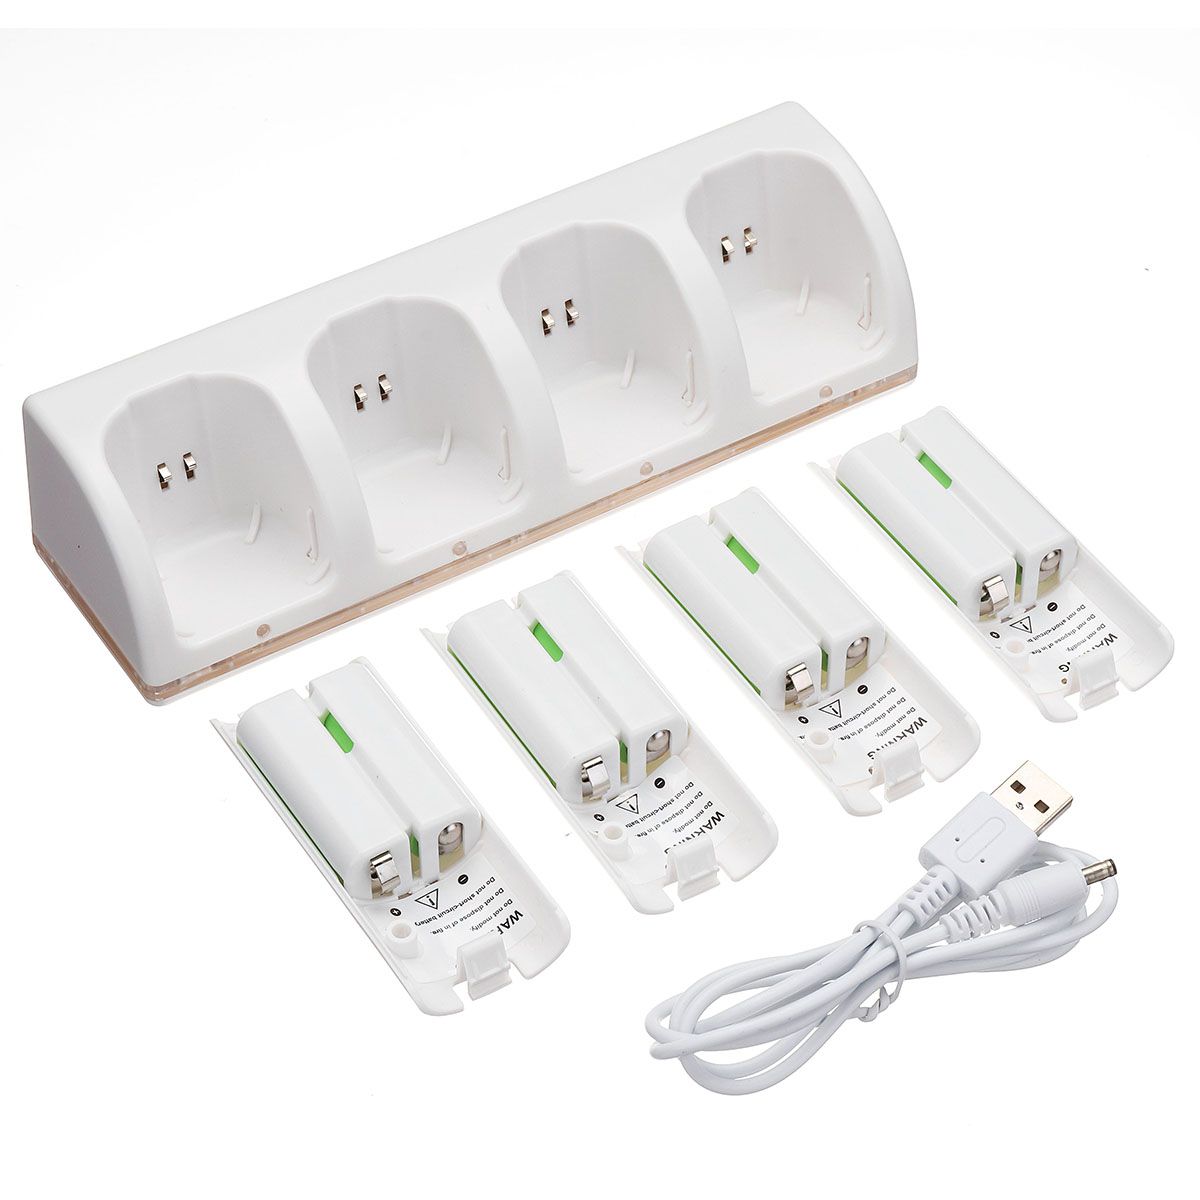 White-Charger-Dock-Station-for-Wii-Remote-Controller--4-x-Rechargeable-Battery-1706164